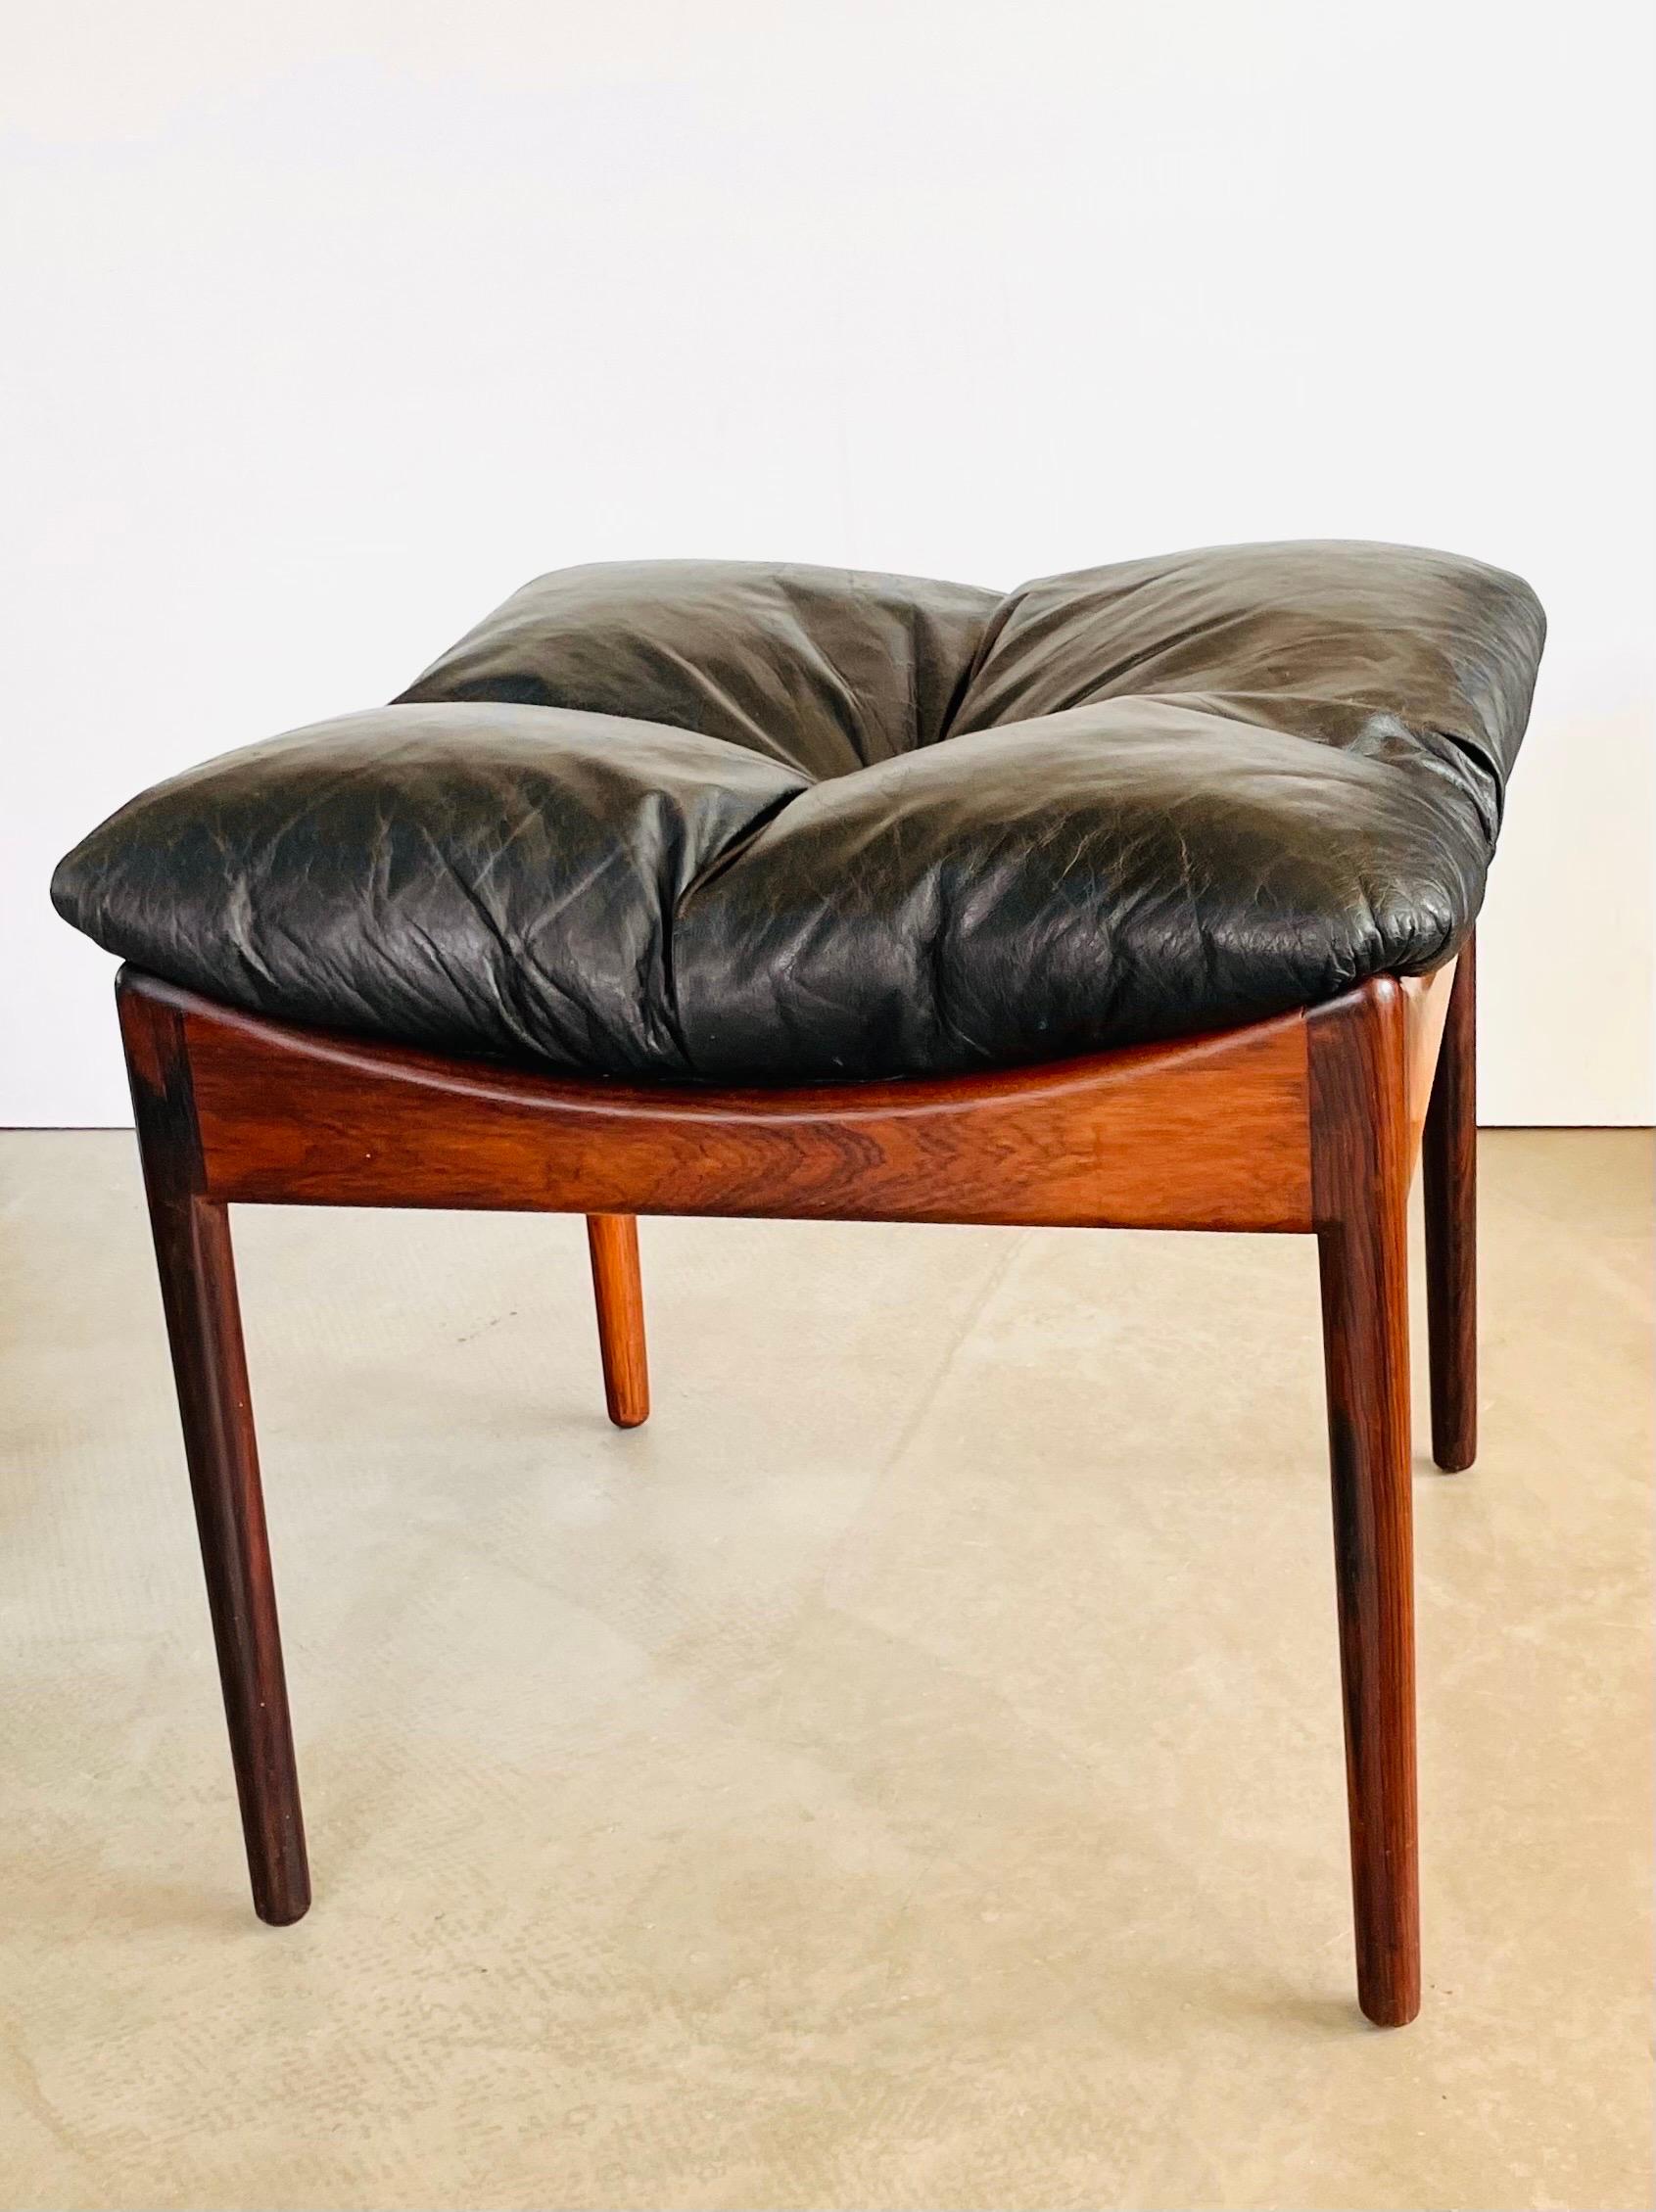 Beautiful rare high hocker or pouf by Kristian Solmer Vedel for Soren Willadson, ca. 1965. Made of beautifully grained rosewood and leather, in an excellent condition, with a perfectly soft leather tufted cushion in excellent condition. This ottoman